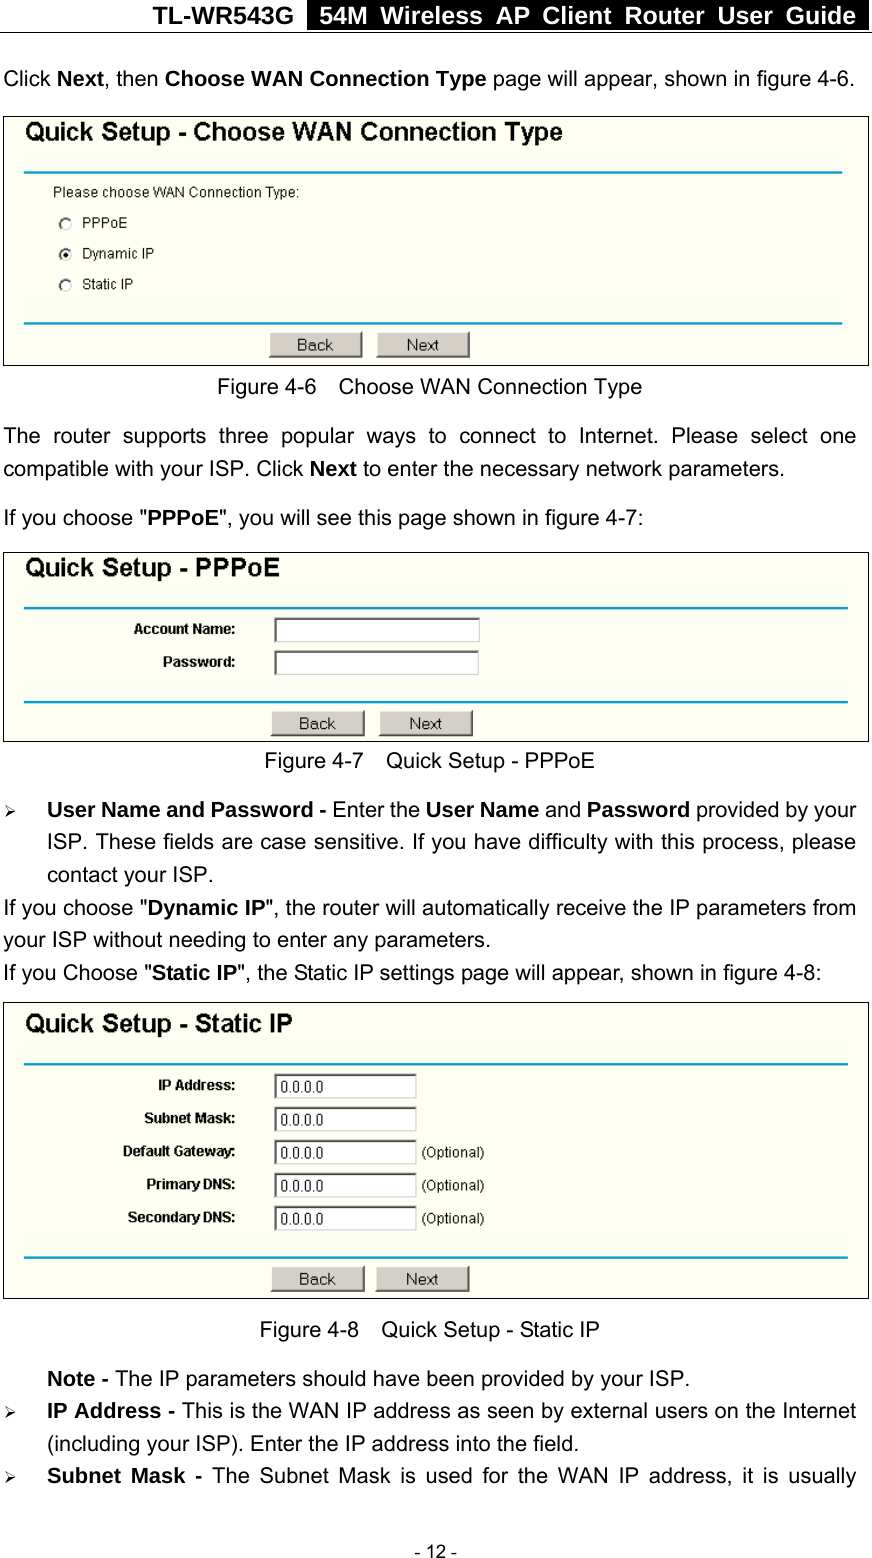 TL-WR543G   54M Wireless AP Client Router User Guide  Click Next, then Choose WAN Connection Type page will appear, shown in figure 4-6.  Figure 4-6    Choose WAN Connection Type The router supports three popular ways to connect to Internet. Please select one compatible with your ISP. Click Next to enter the necessary network parameters. If you choose &quot;PPPoE&quot;, you will see this page shown in figure 4-7:    Figure 4-7    Quick Setup - PPPoE ¾ User Name and Password - Enter the User Name and Password provided by your ISP. These fields are case sensitive. If you have difficulty with this process, please contact your ISP. If you choose &quot;Dynamic IP&quot;, the router will automatically receive the IP parameters from your ISP without needing to enter any parameters. If you Choose &quot;Static IP&quot;, the Static IP settings page will appear, shown in figure 4-8:    Figure 4-8    Quick Setup - Static IP  Note - The IP parameters should have been provided by your ISP. ¾ IP Address - This is the WAN IP address as seen by external users on the Internet (including your ISP). Enter the IP address into the field. ¾ Subnet Mask - The Subnet Mask is used for the WAN IP address, it is usually  - 12 - 